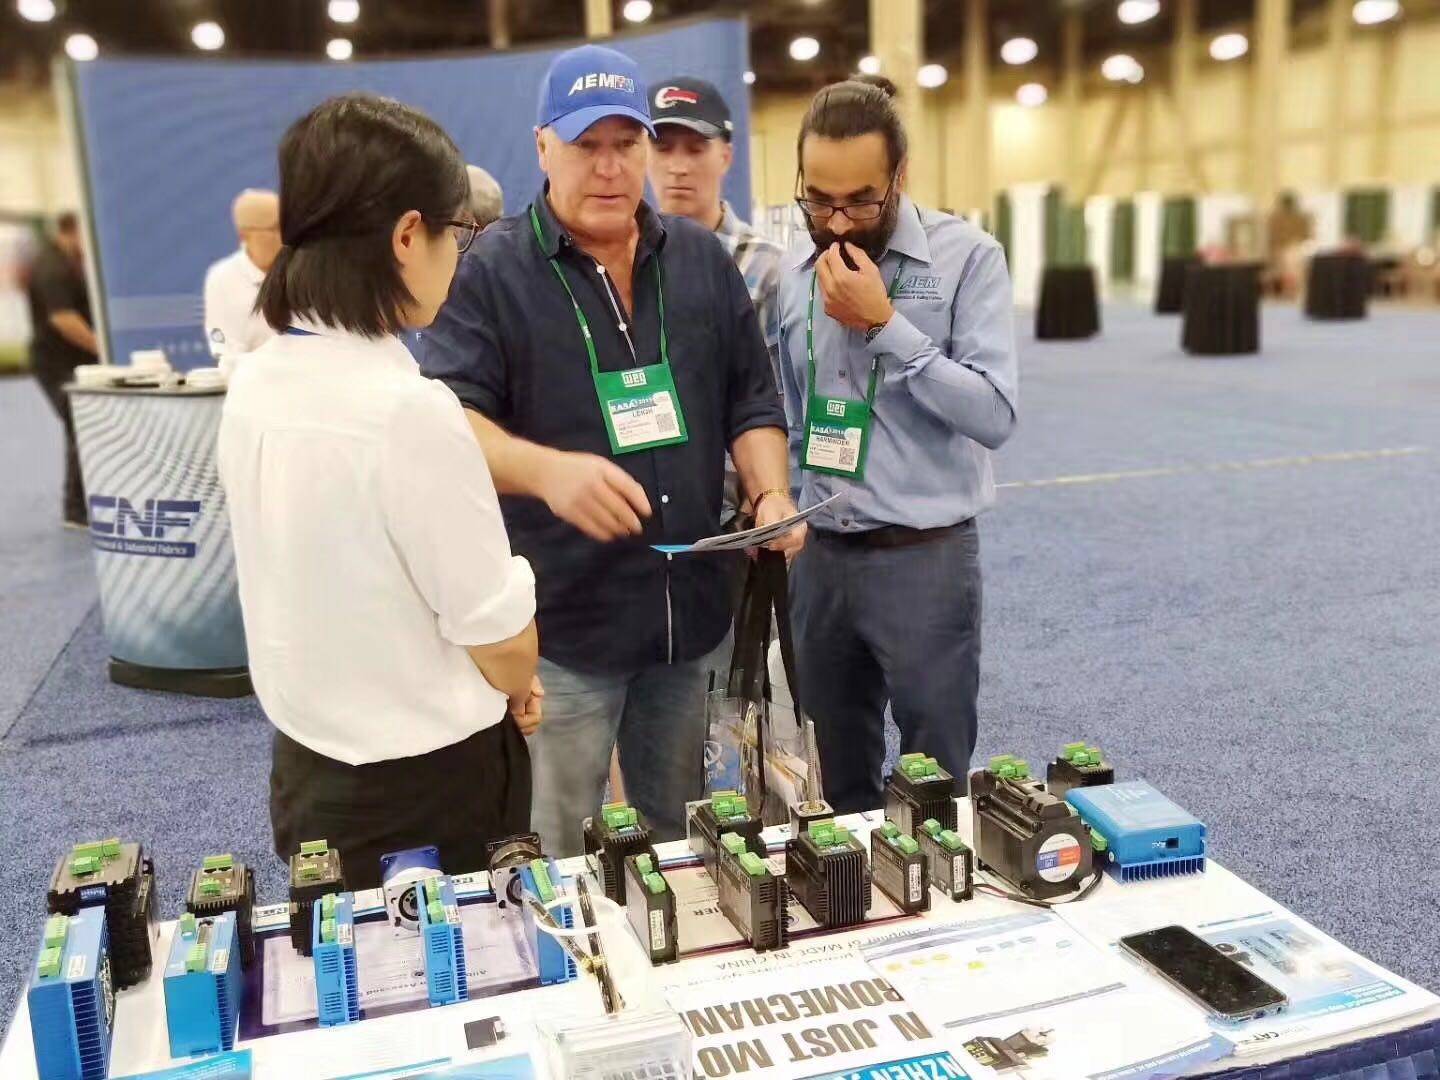 JMC participated in the 2019 Automation Exhibition in Las Vegas, USA